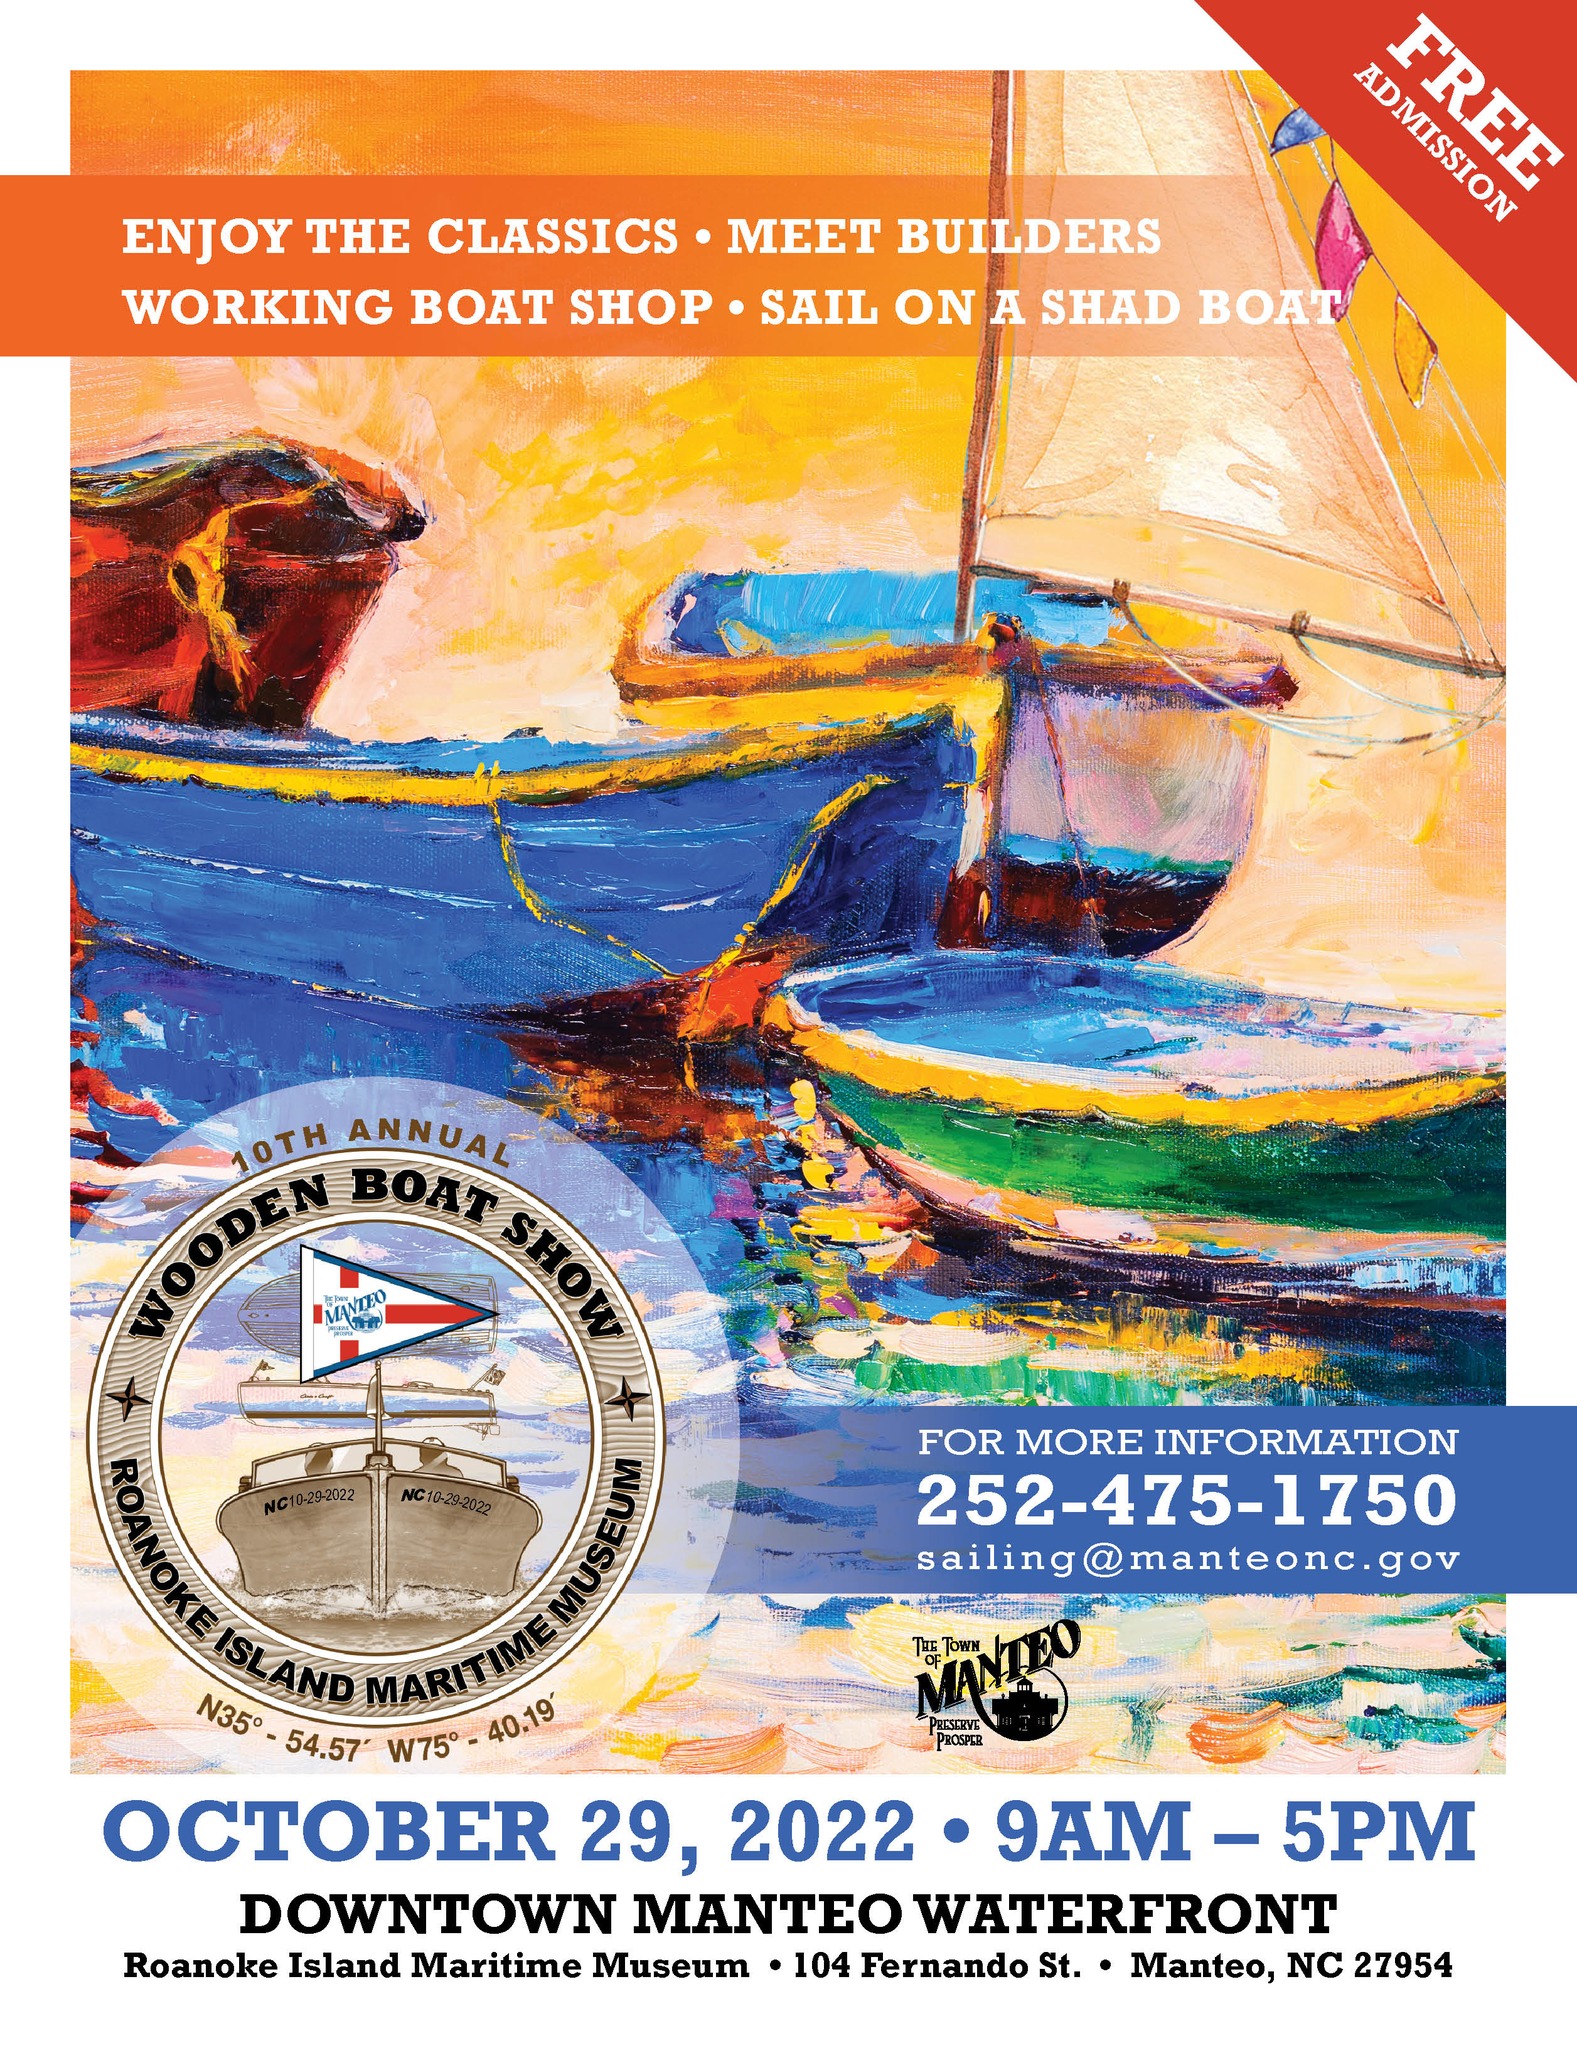 19th annual Wooden Boat Show this Saturday in Manteo